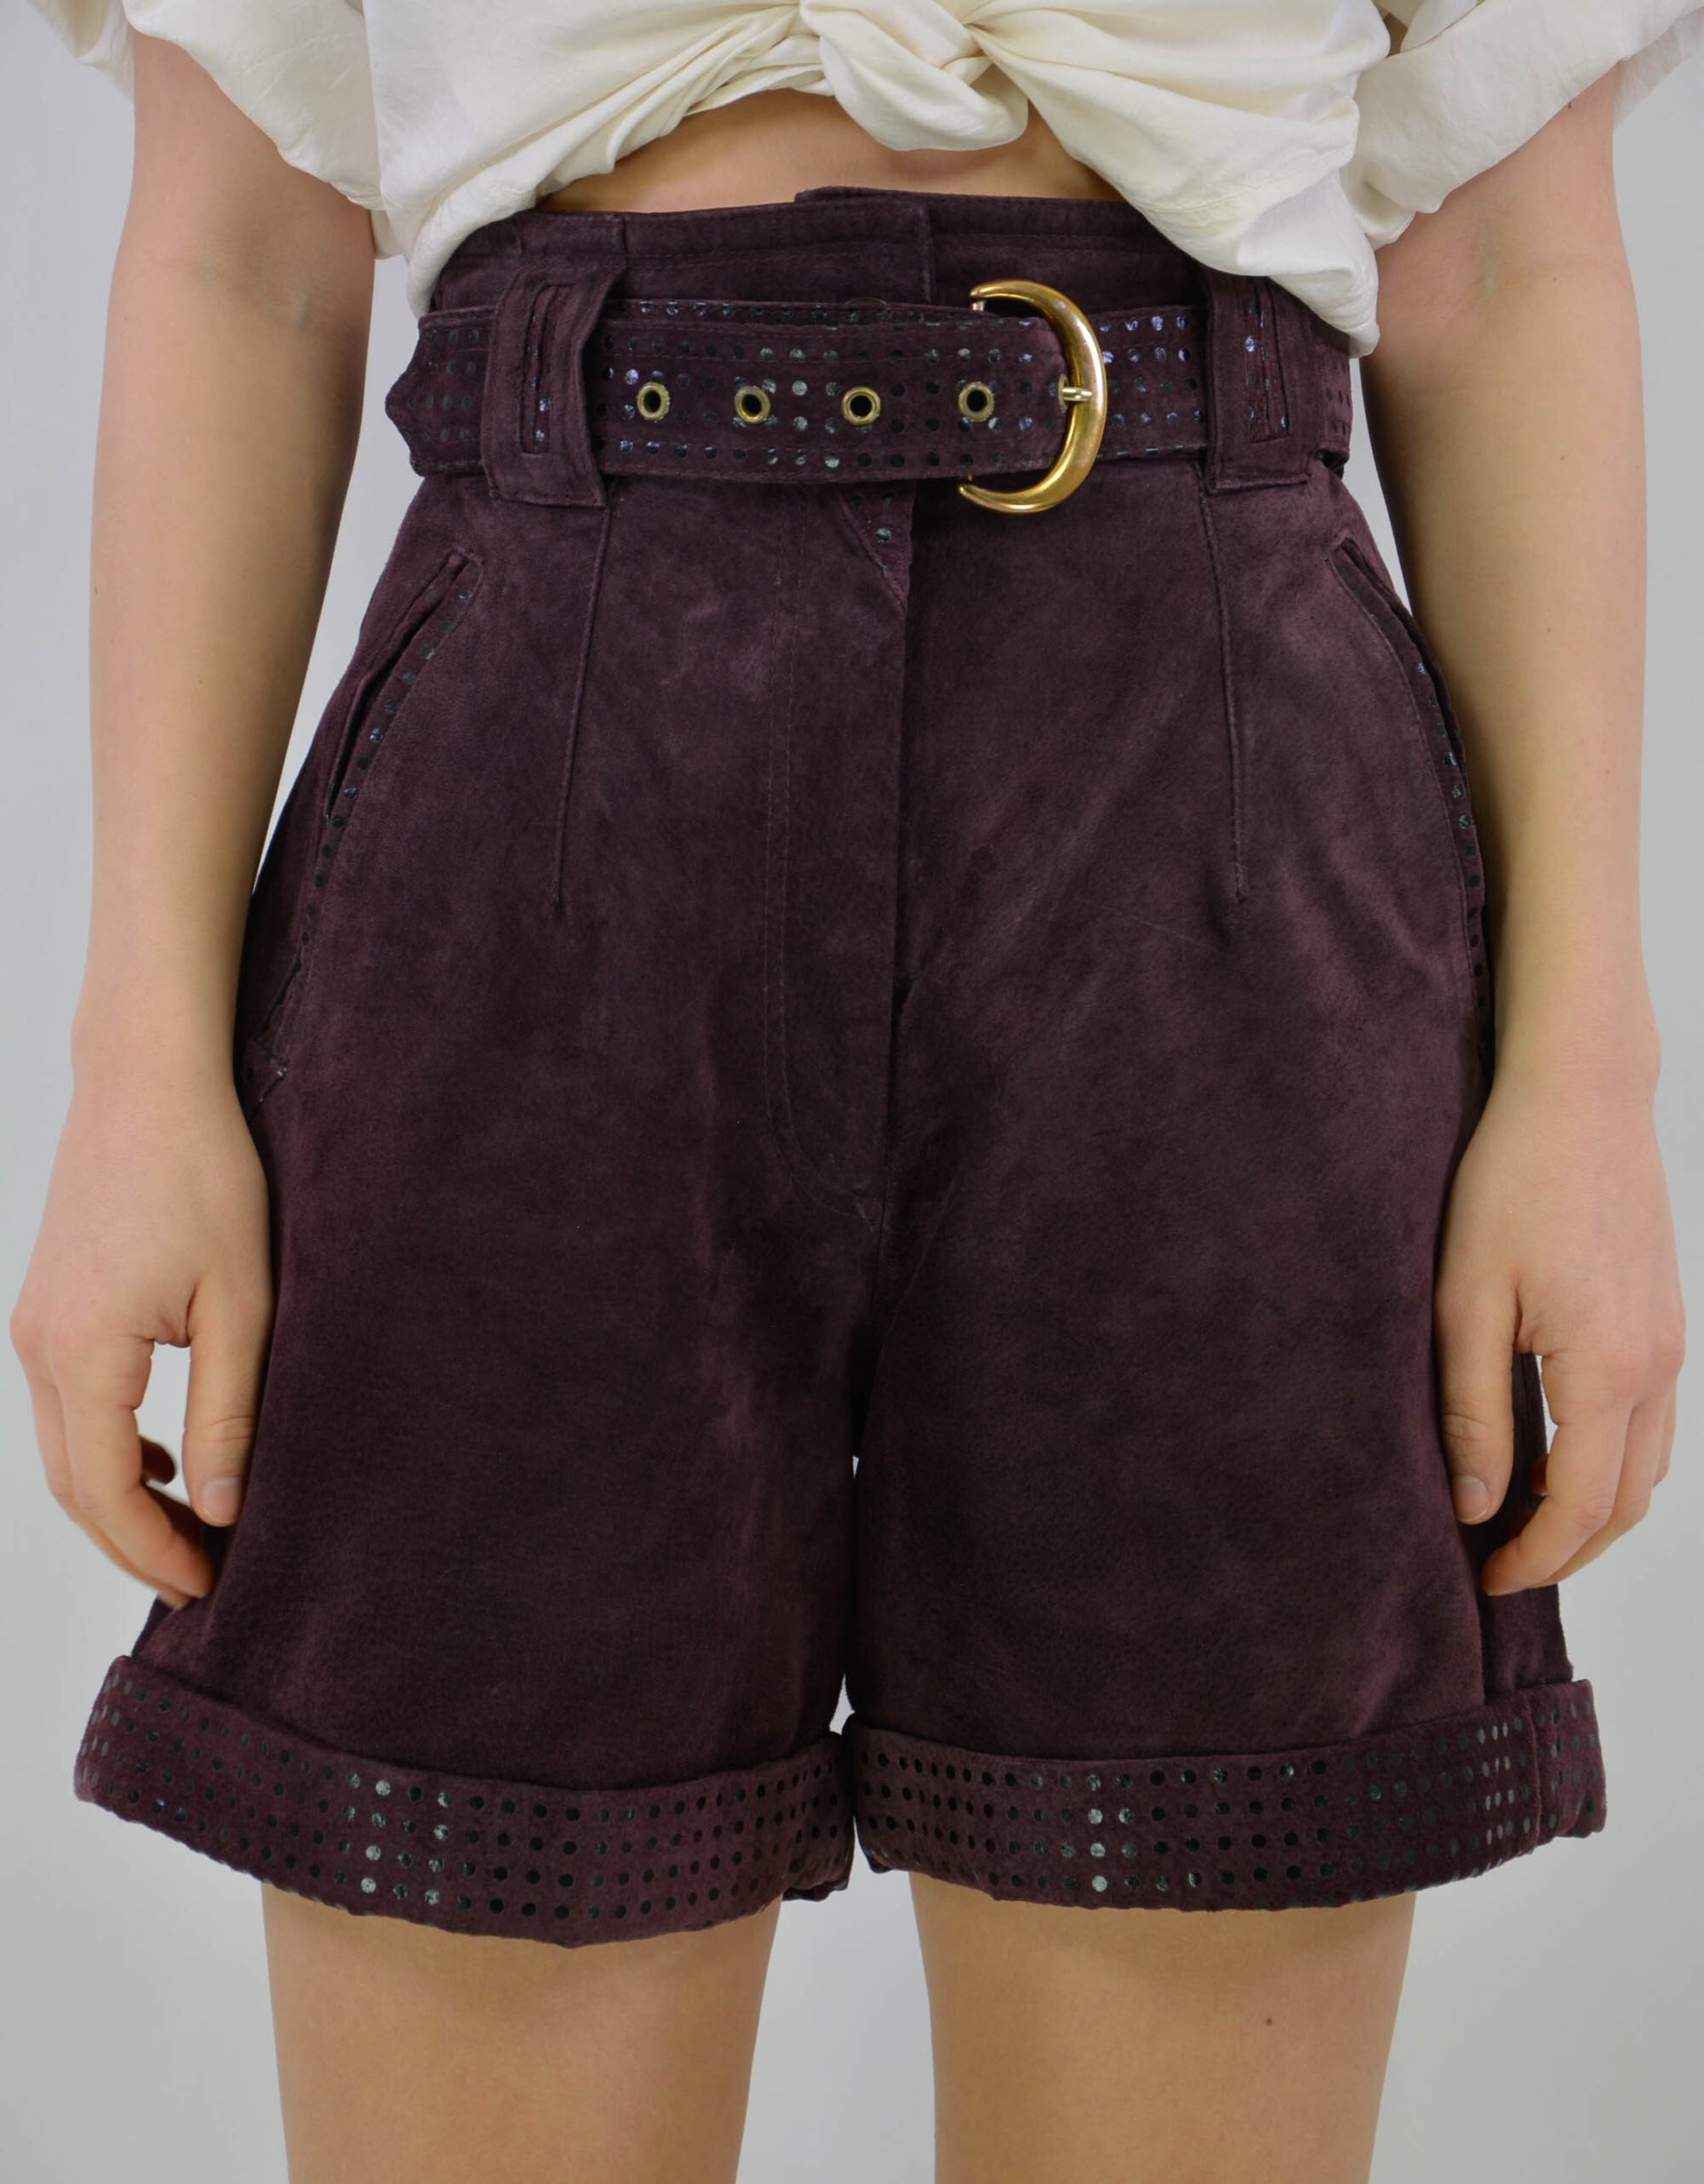 Leather short - PICKNWEIGHT - VINTAGE KILO STORE